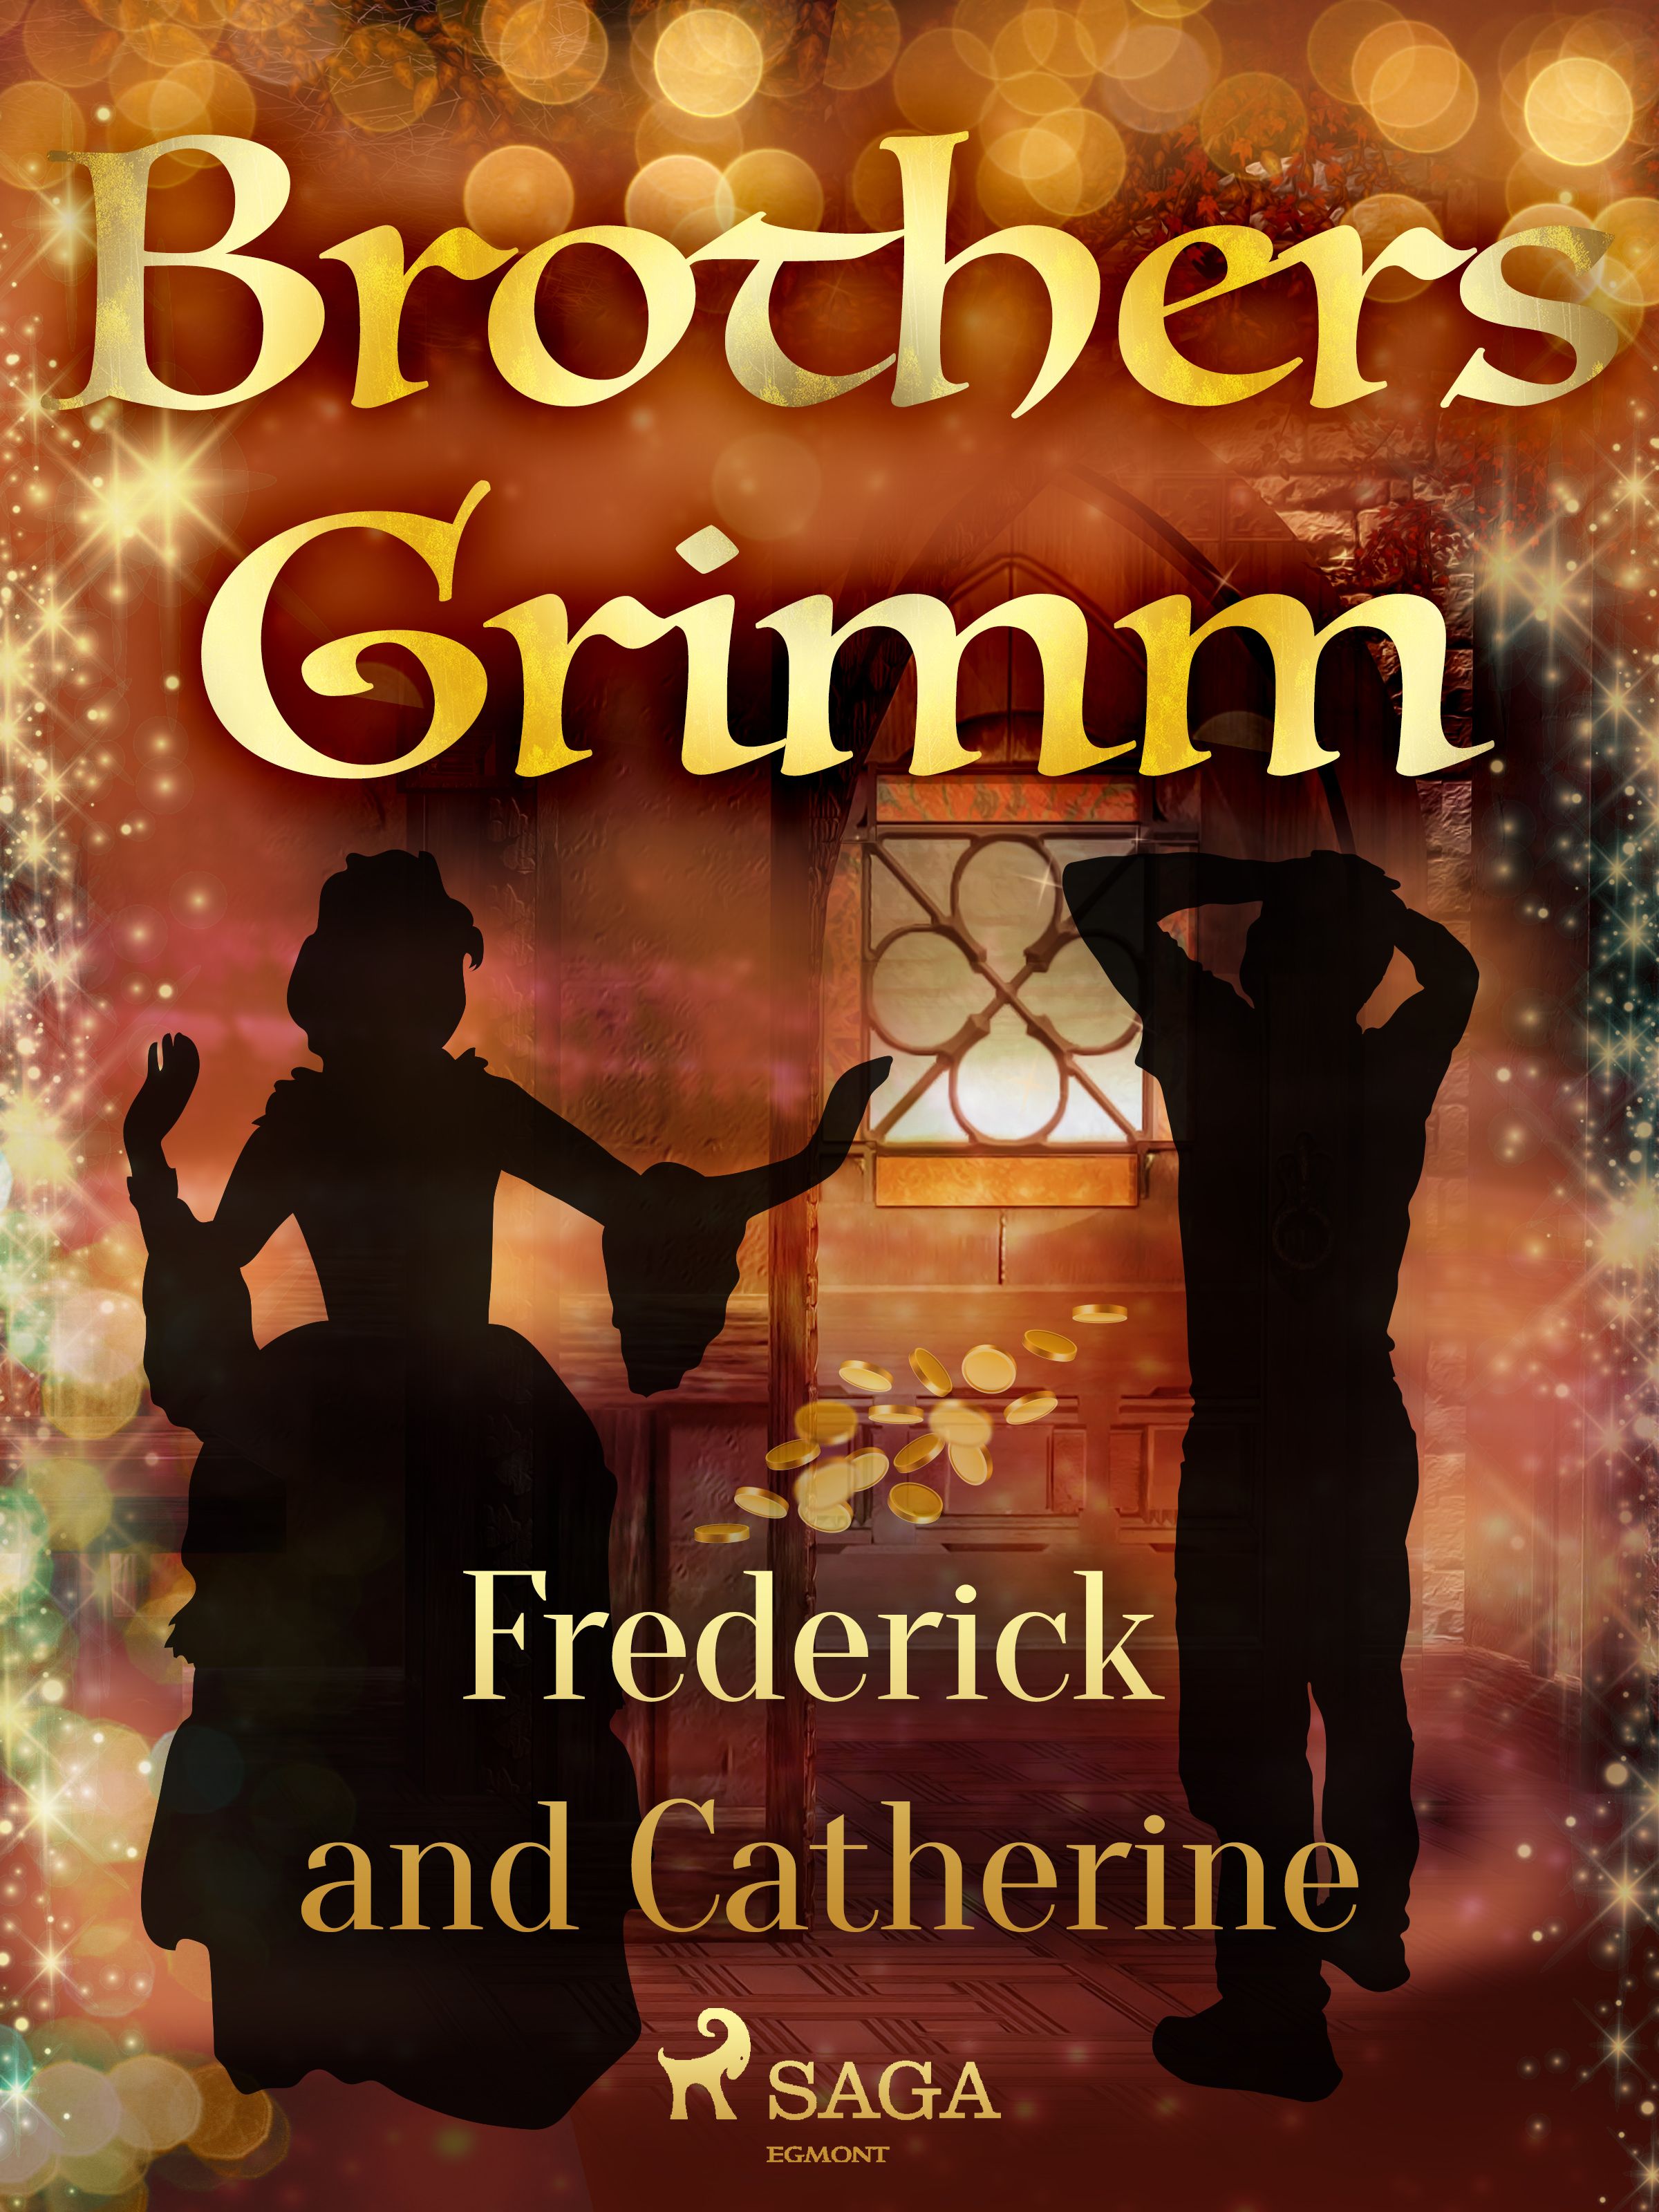 Frederick and Catherine, eBook by Brothers Grimm